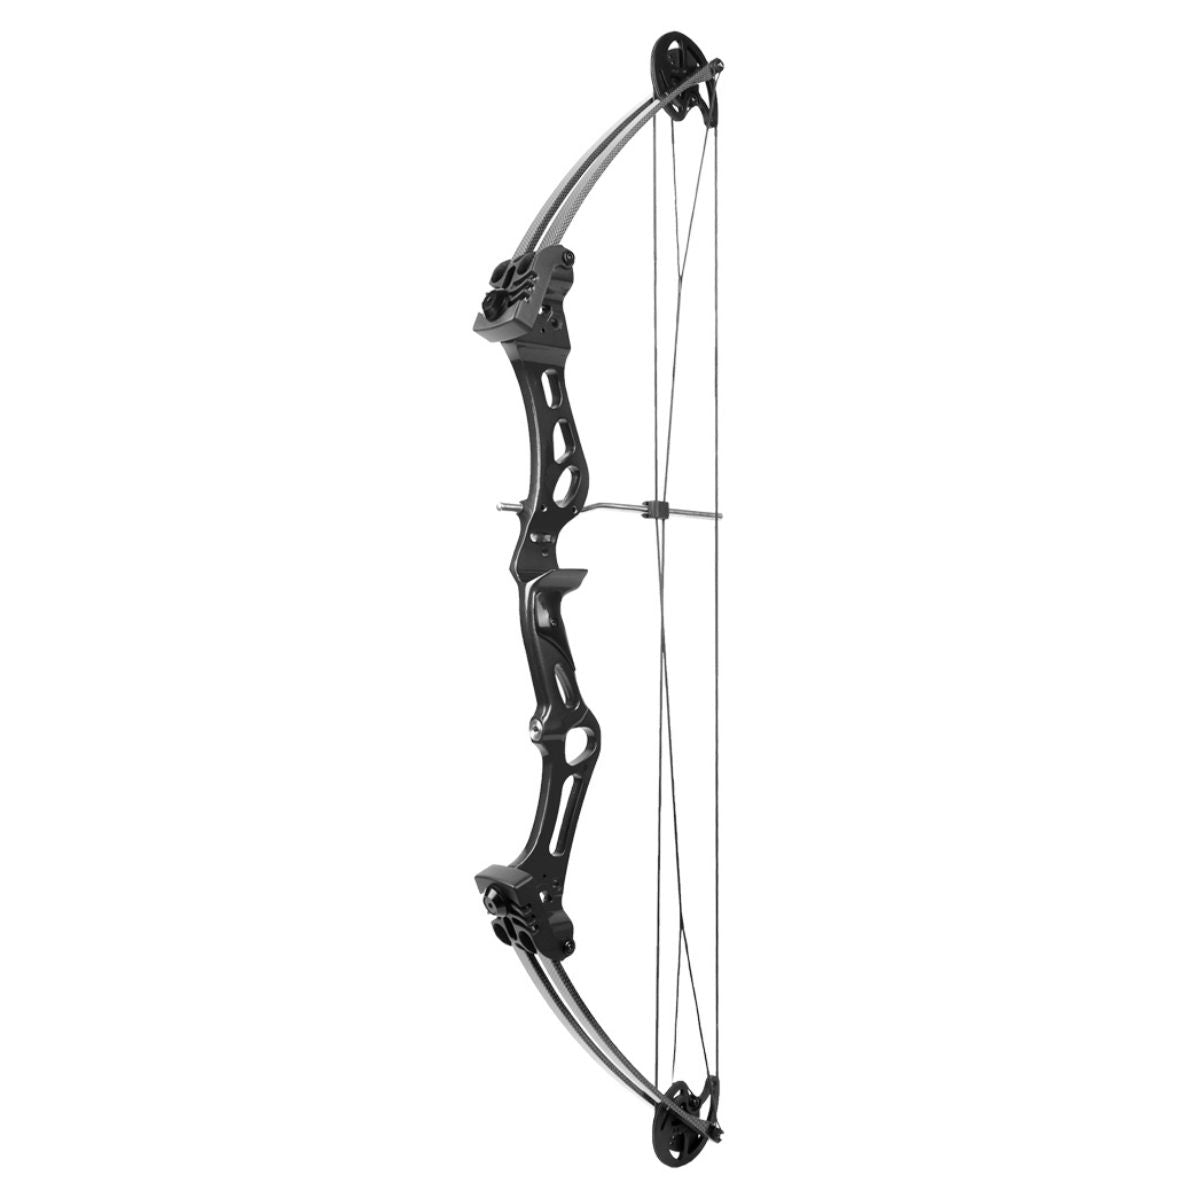 Spark Compound Bow - AS-N107 1